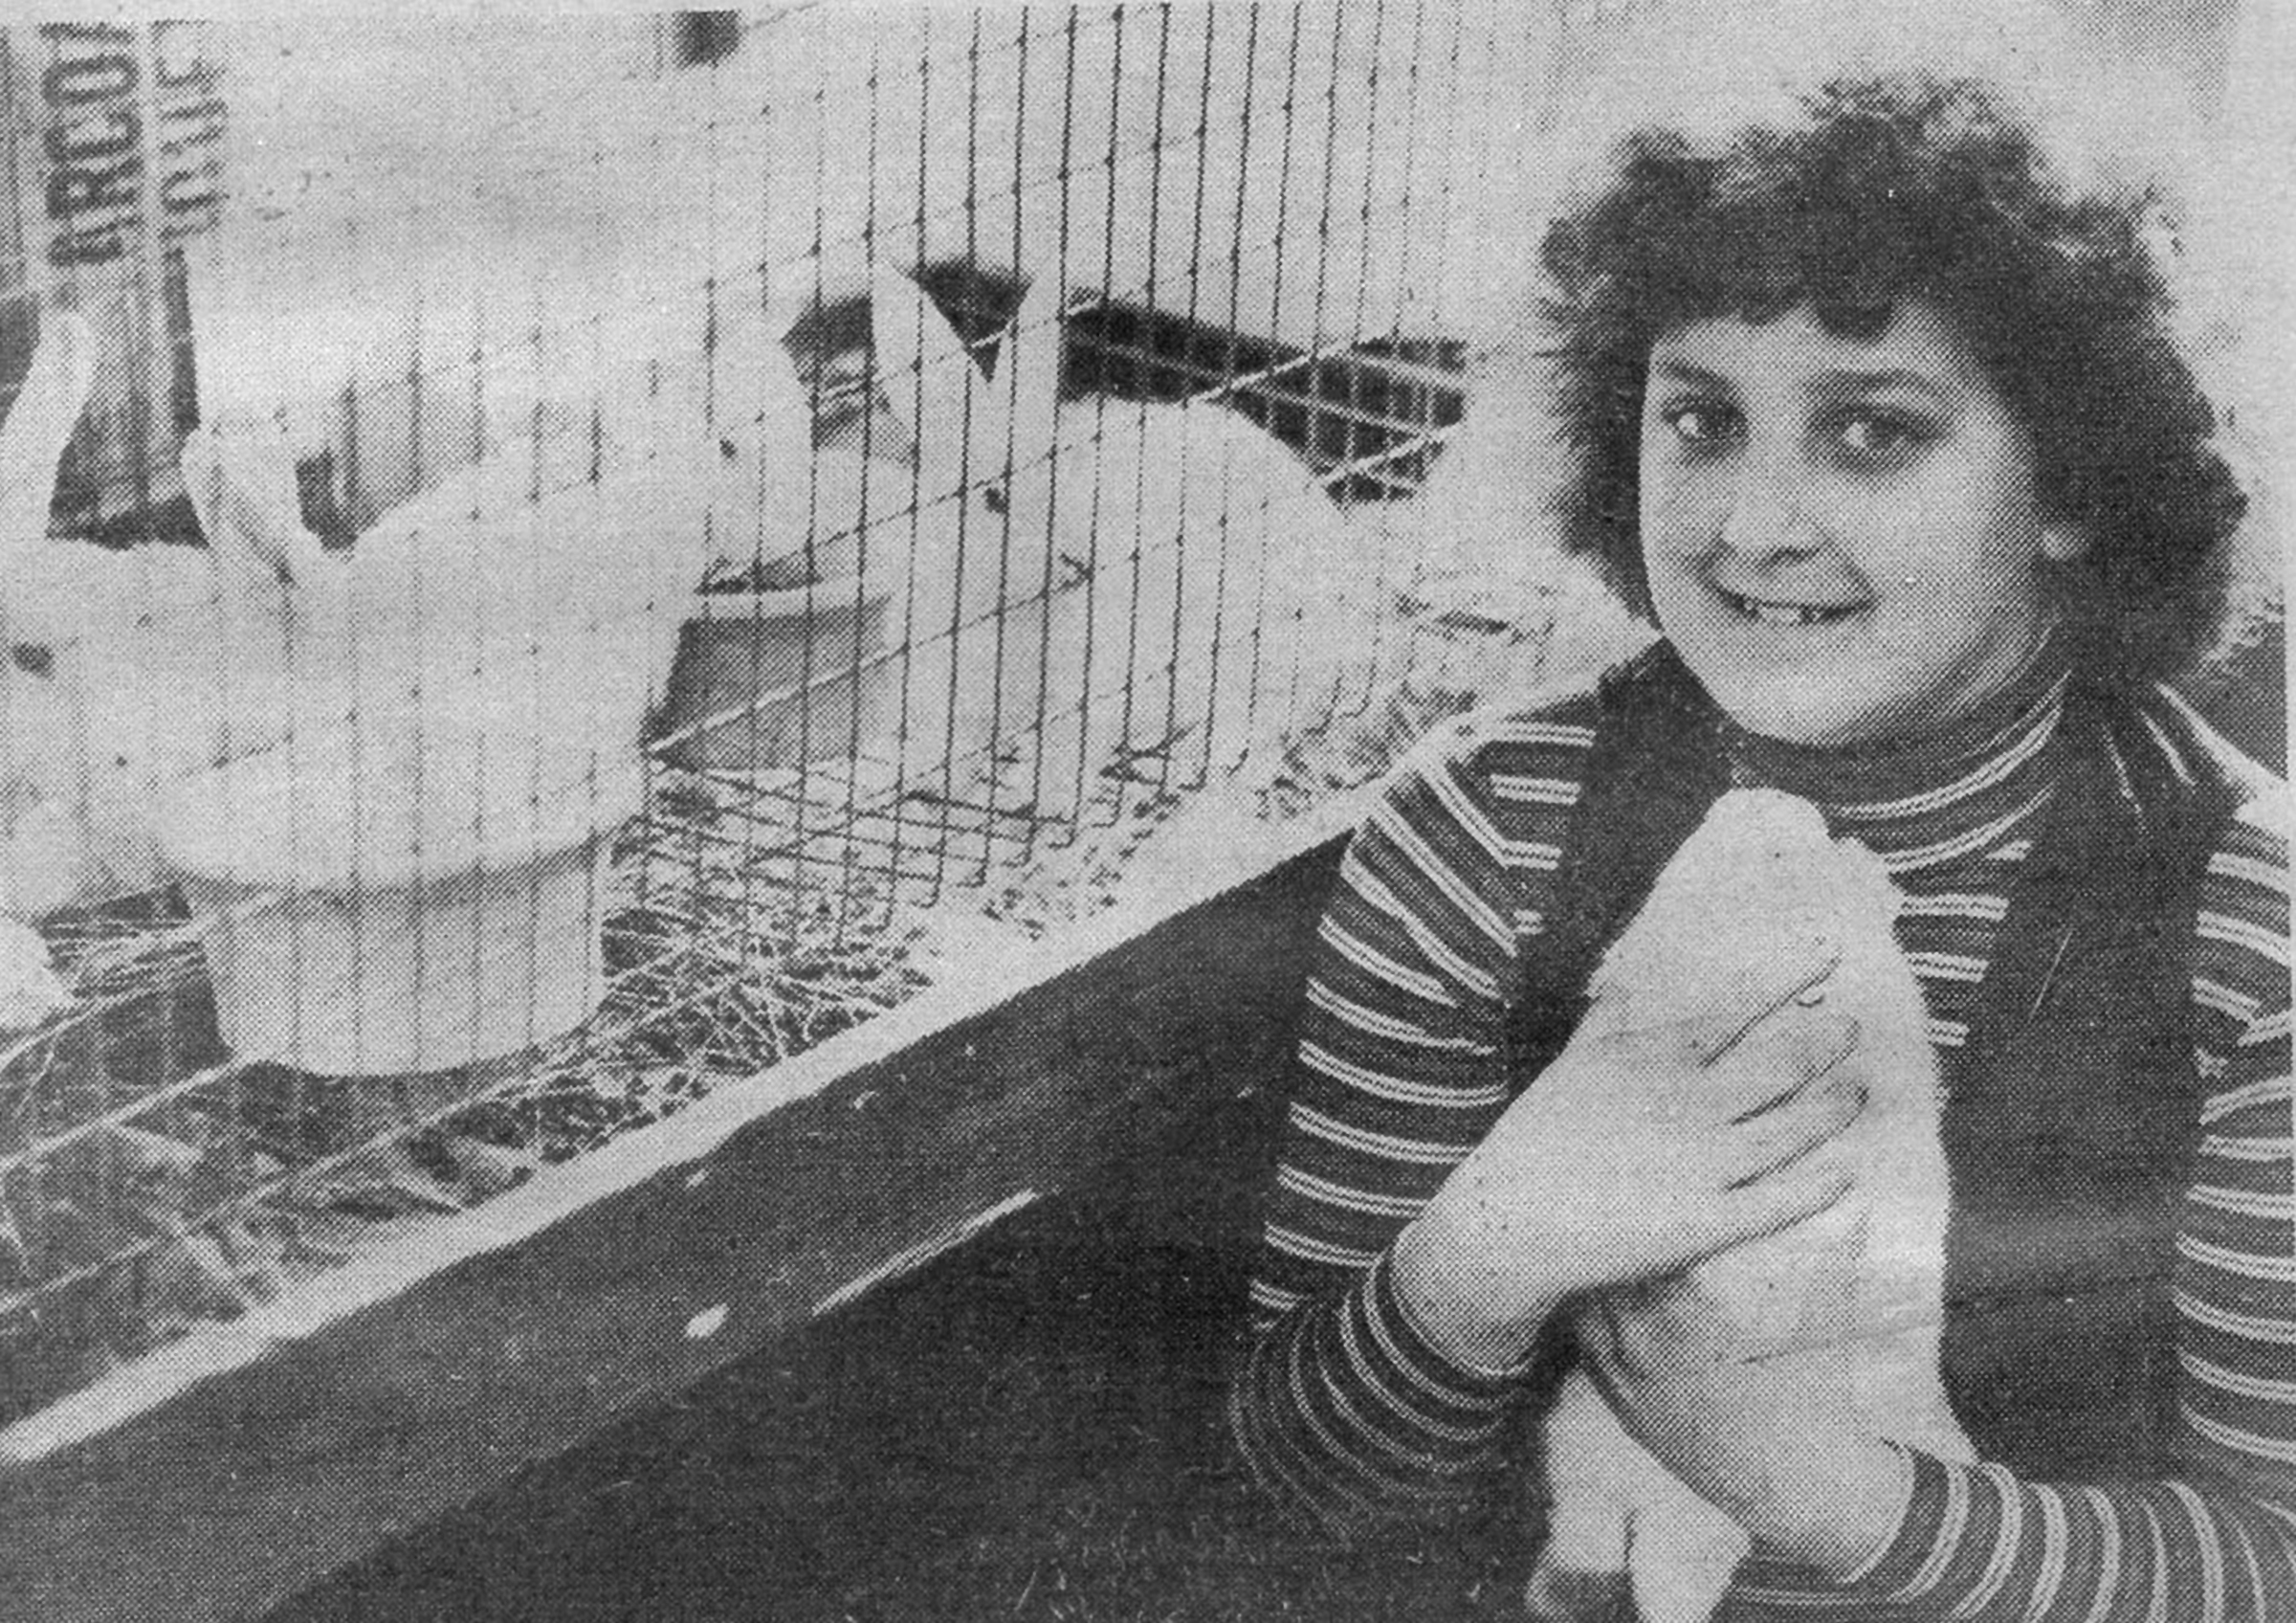 Sag Harbor Variety Store owner Lisa Field as a child when the store sold bunnies at Easter time. COURTESY LISA FIELD